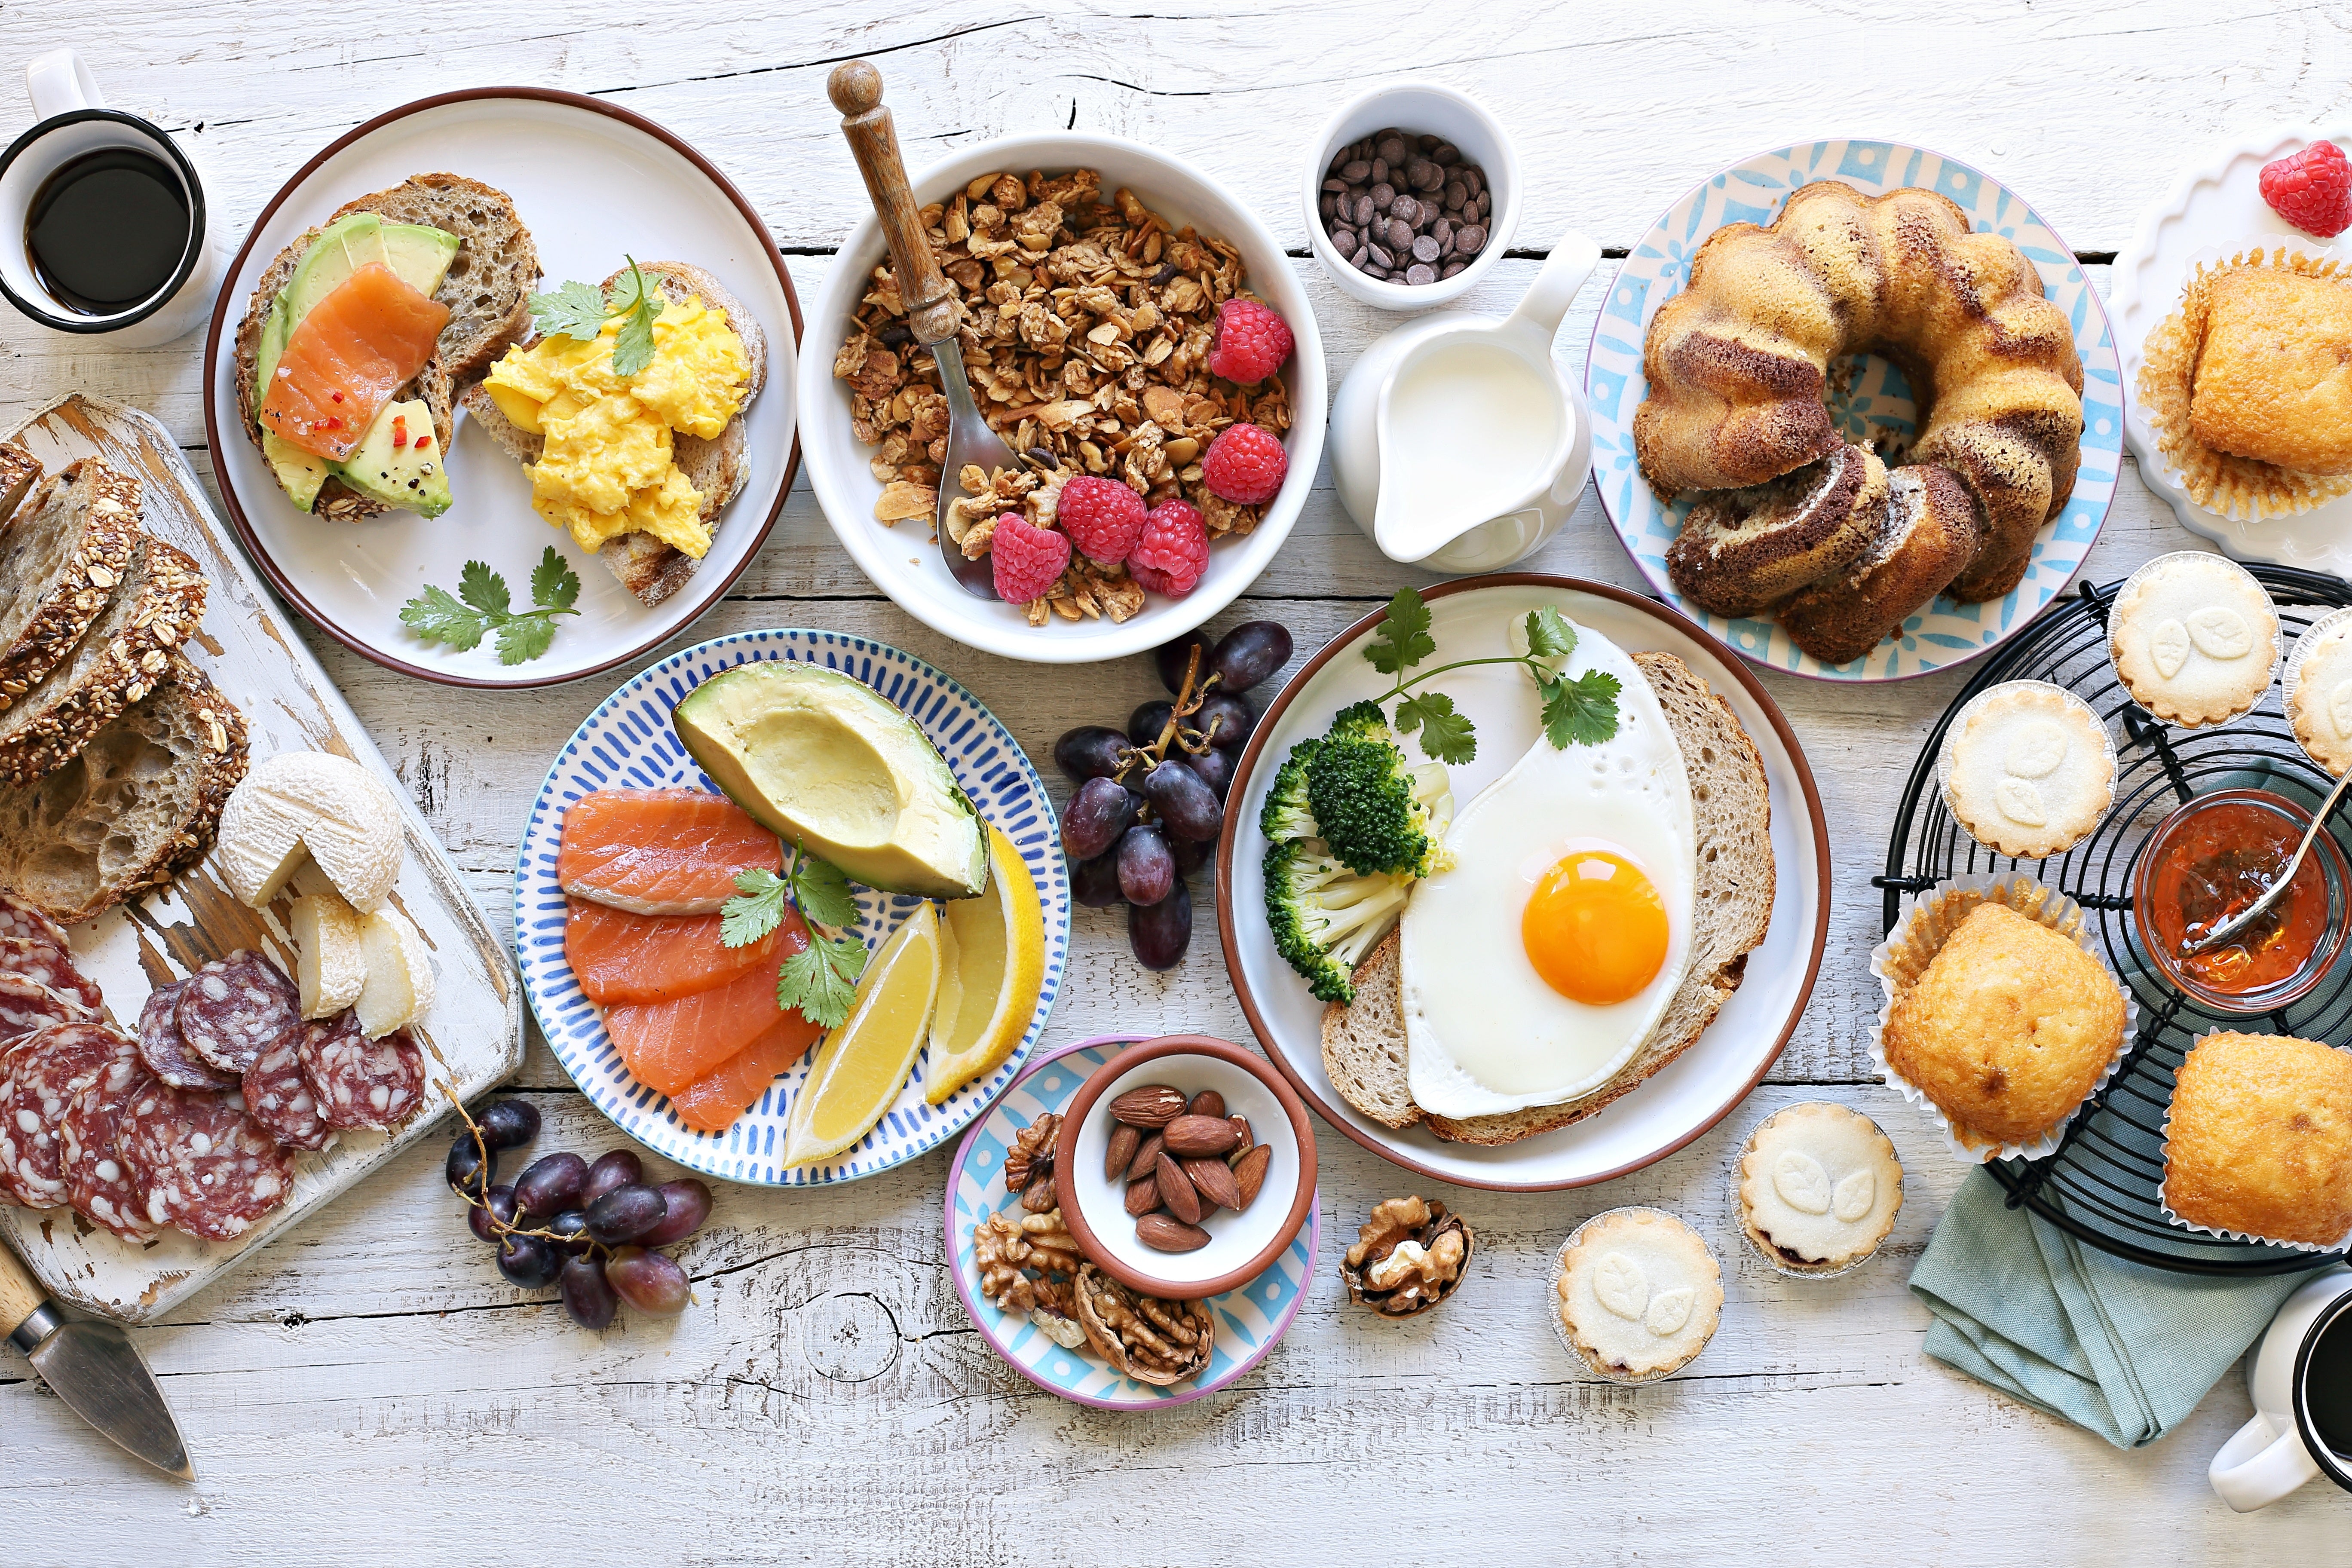 The Best Menu Items for Your Next Brunch